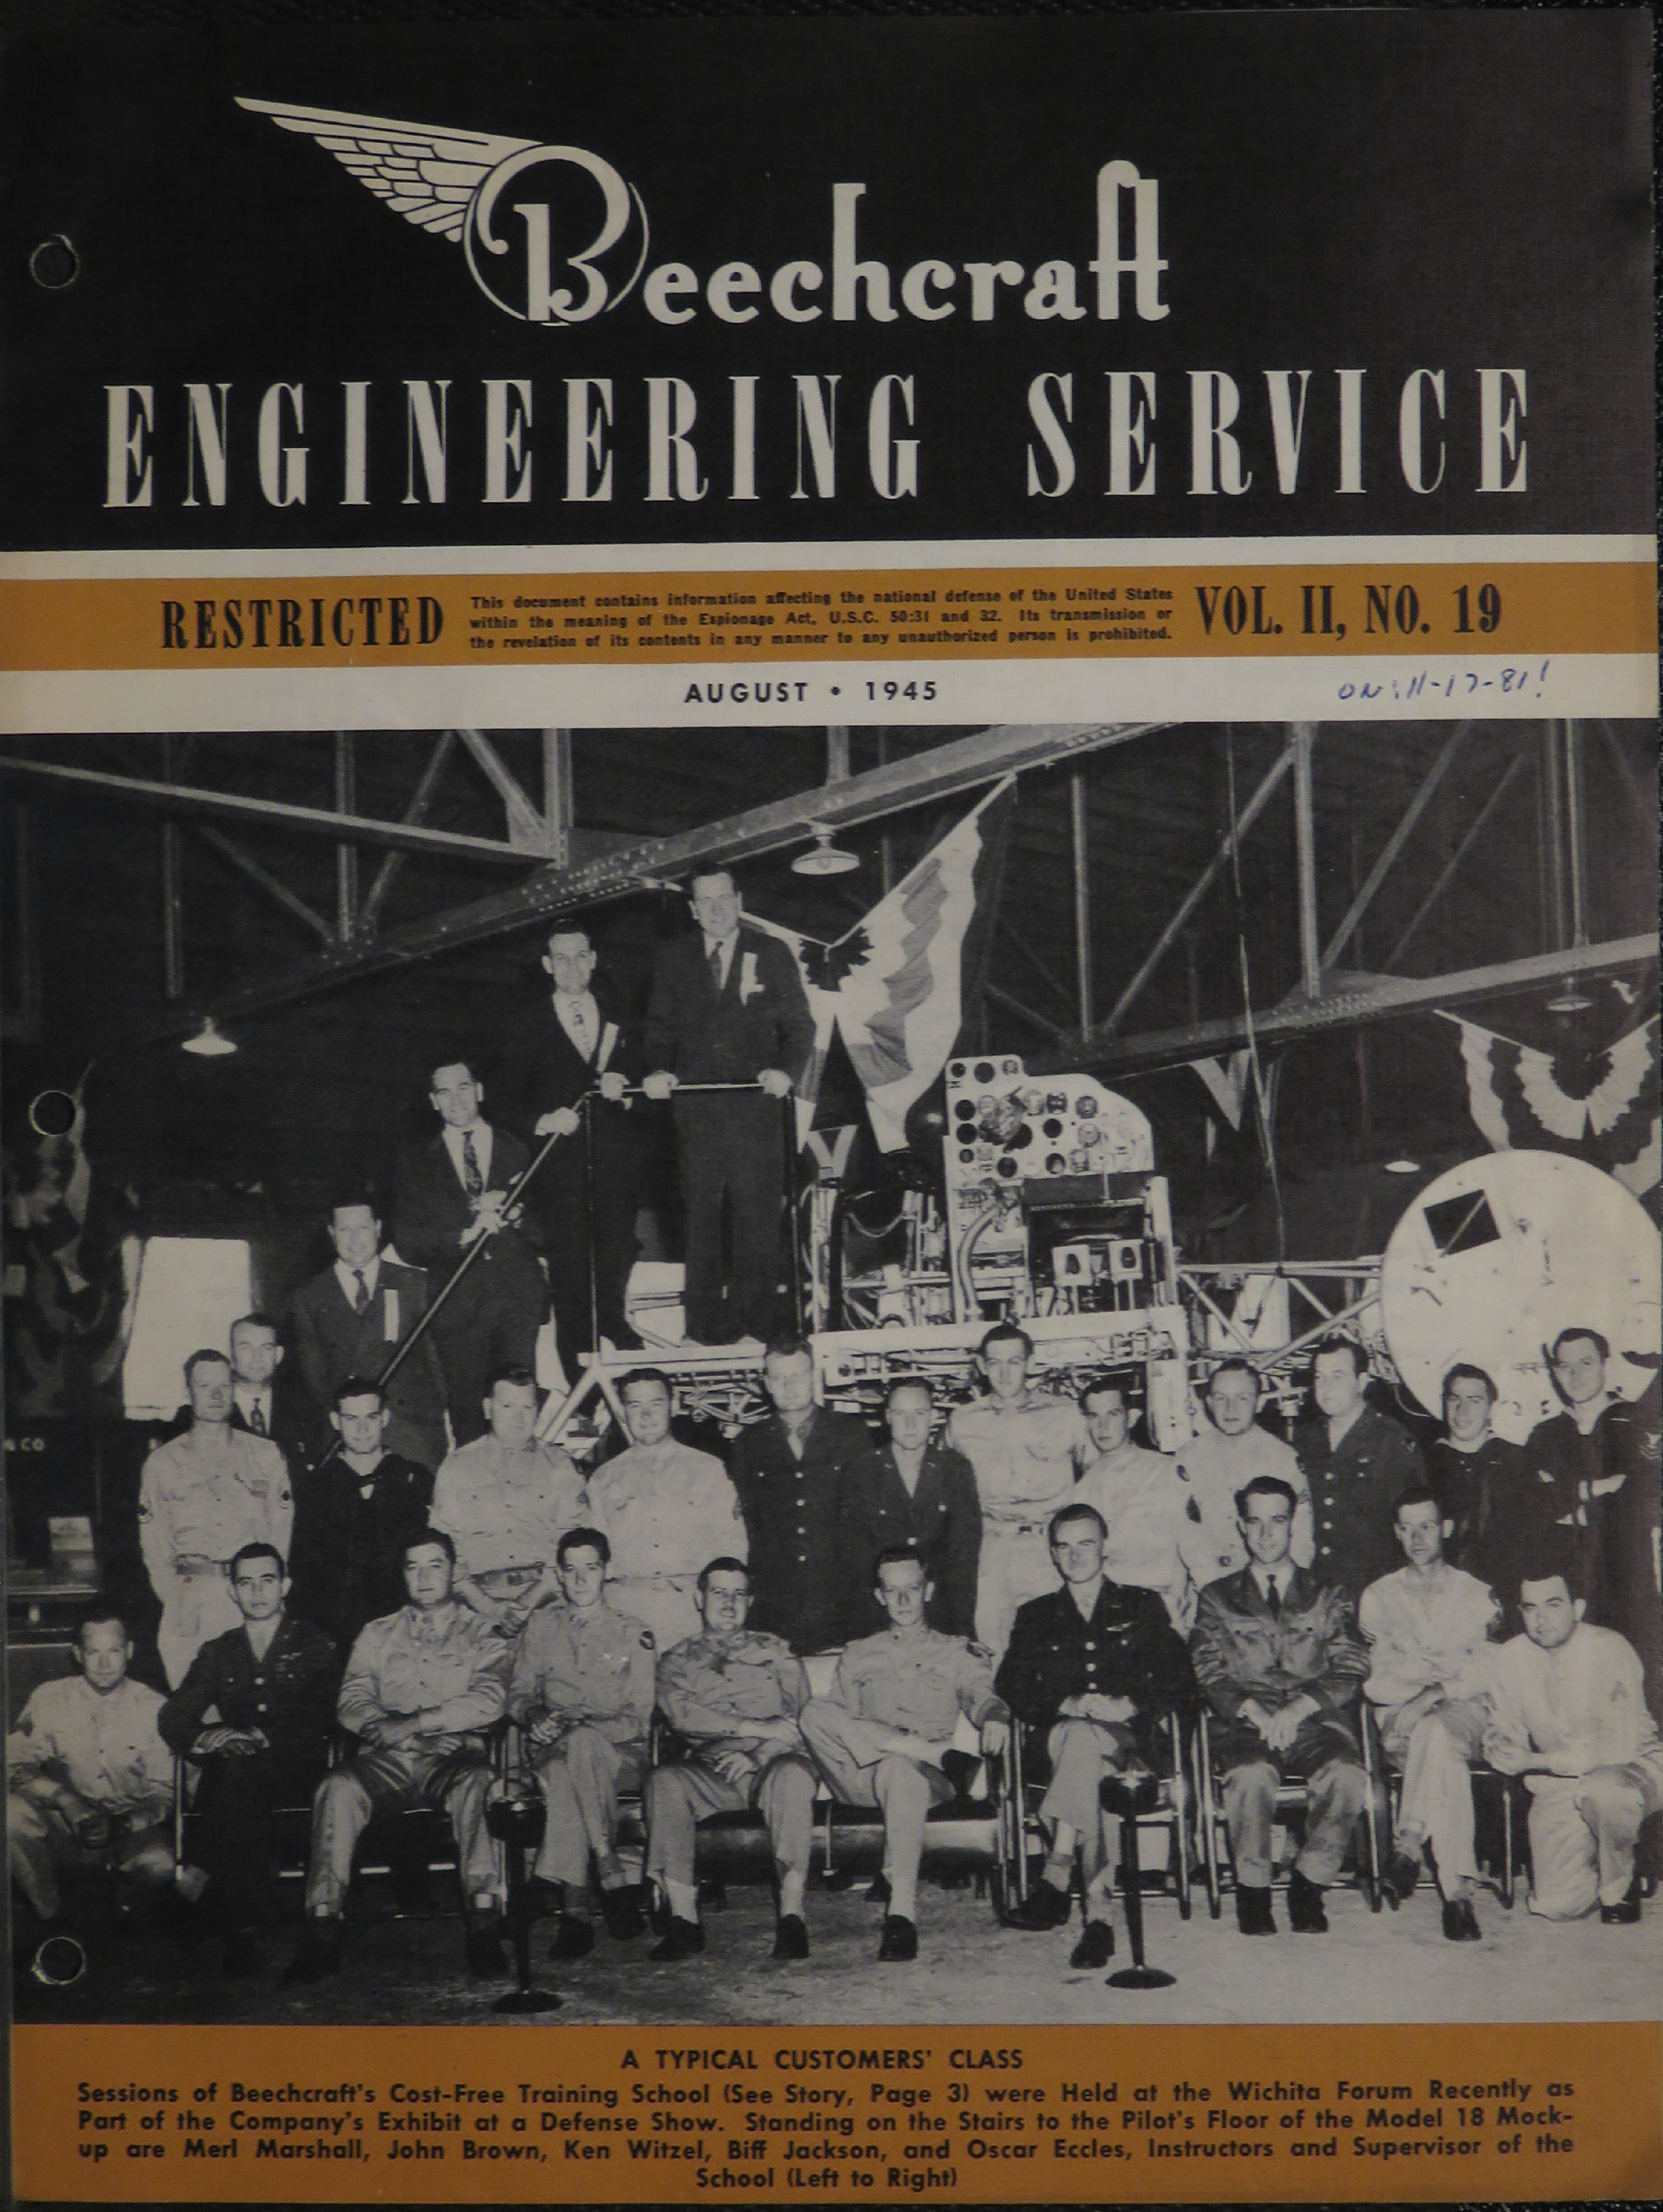 Sample page 1 from AirCorps Library document: Vol. II, No. 19 - Beechcraft Engineering Service